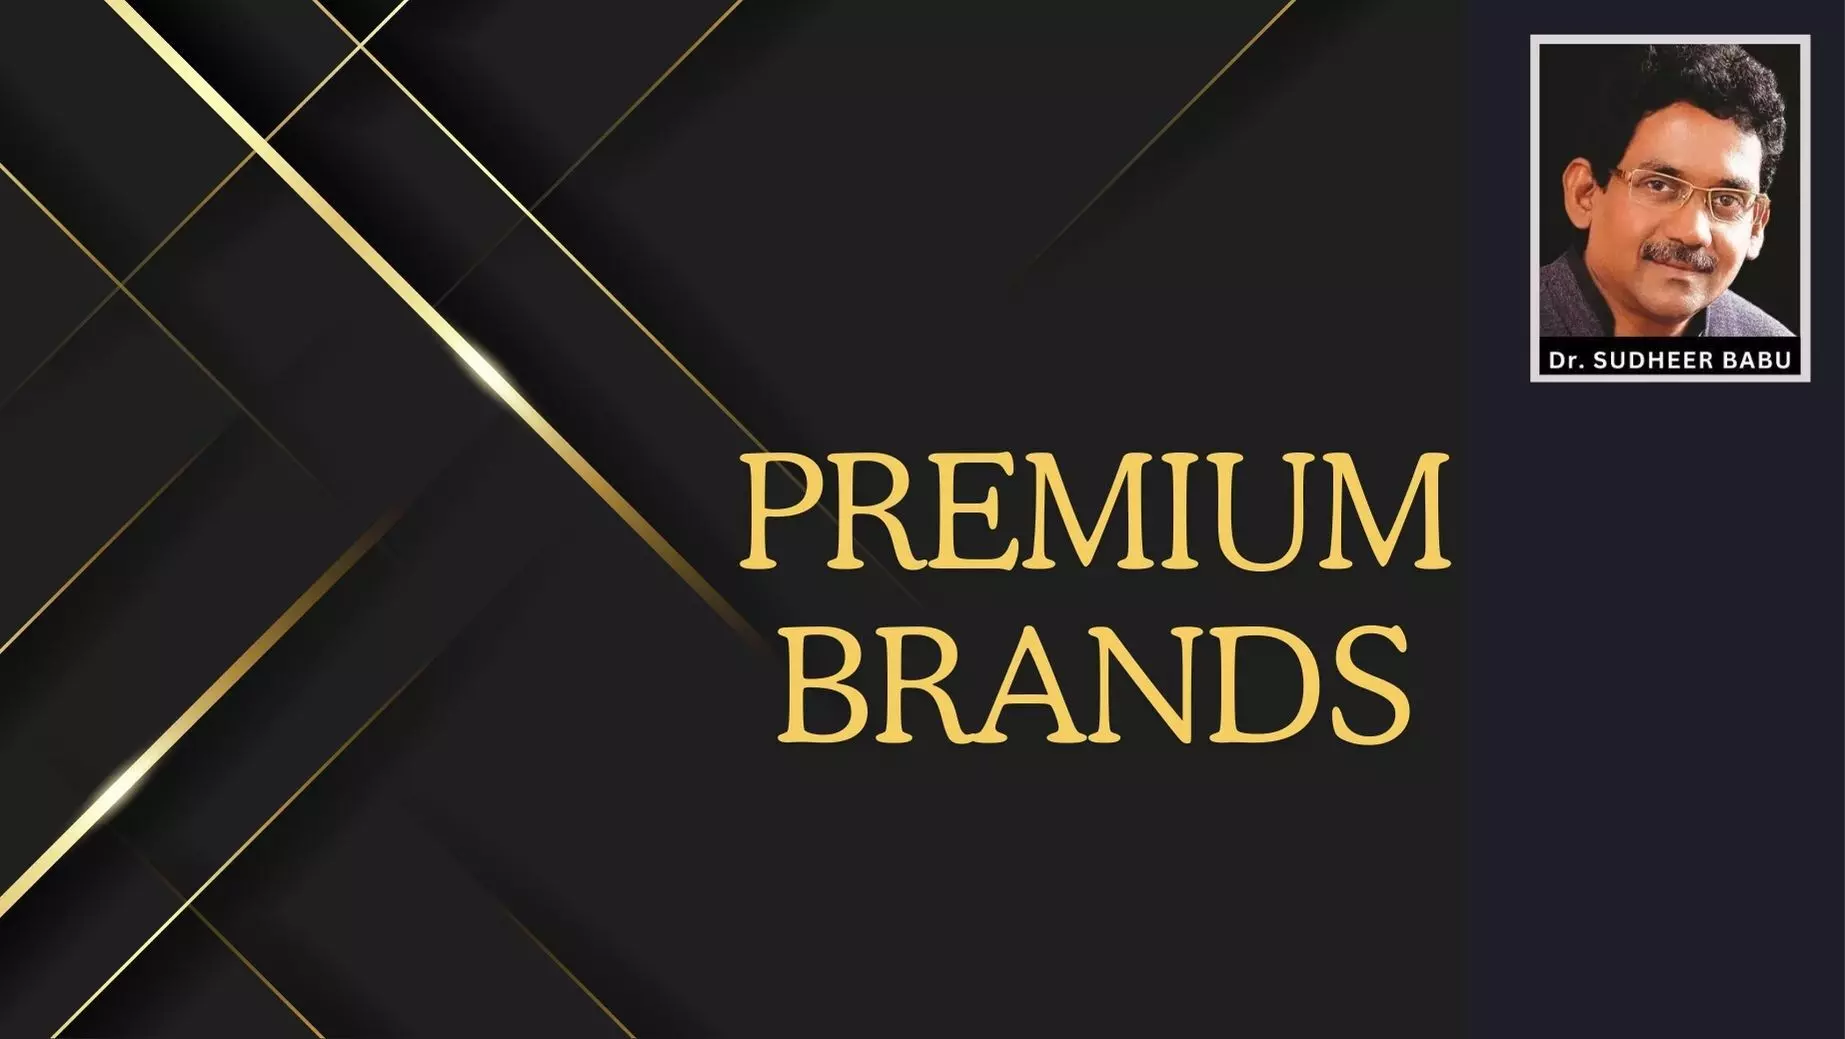 Premium brands need different strategies to attract the market